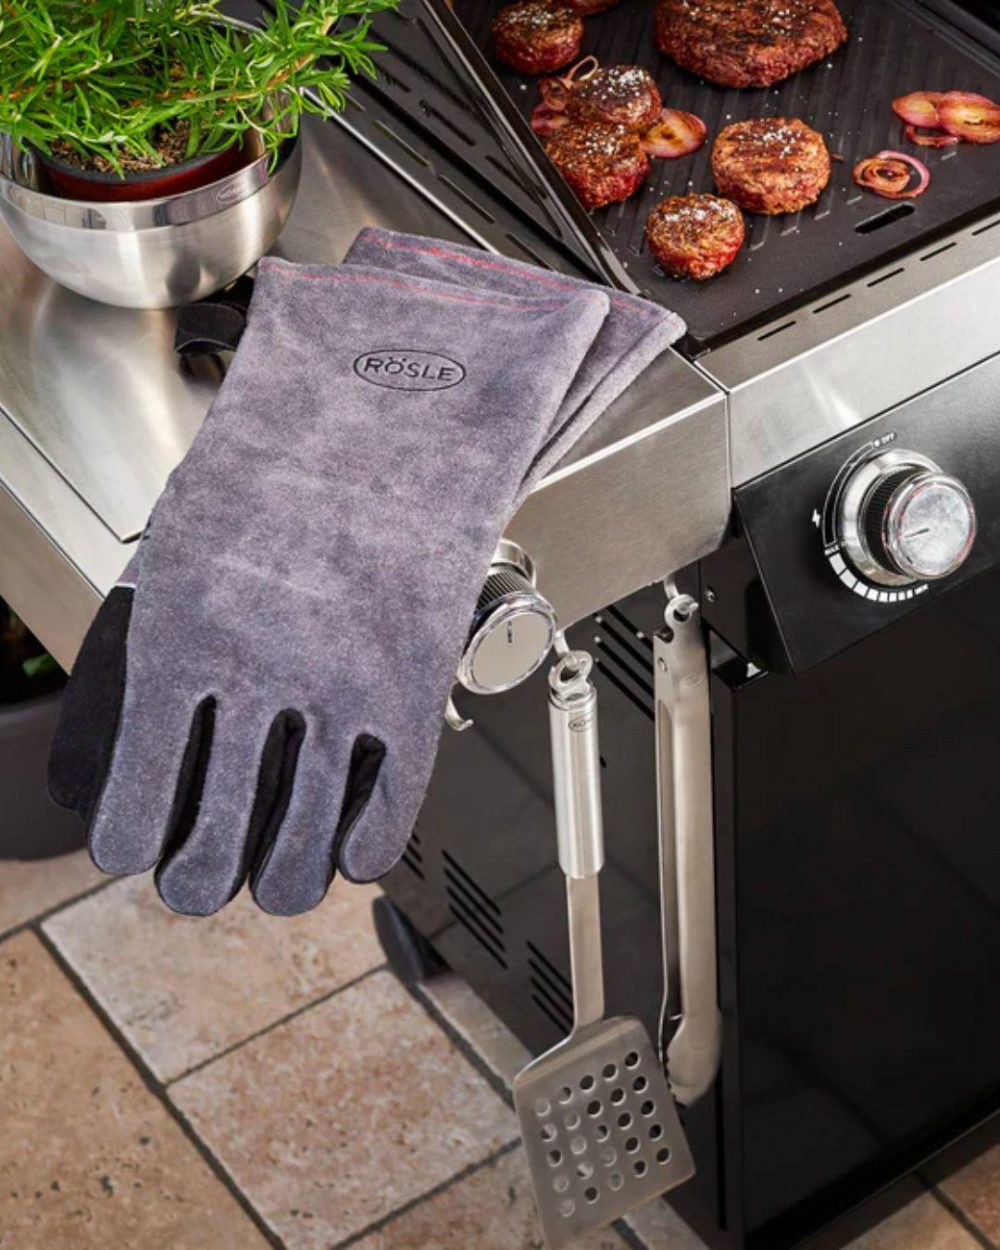 RÖ SLE Barbecue Leather Grilling Gloves